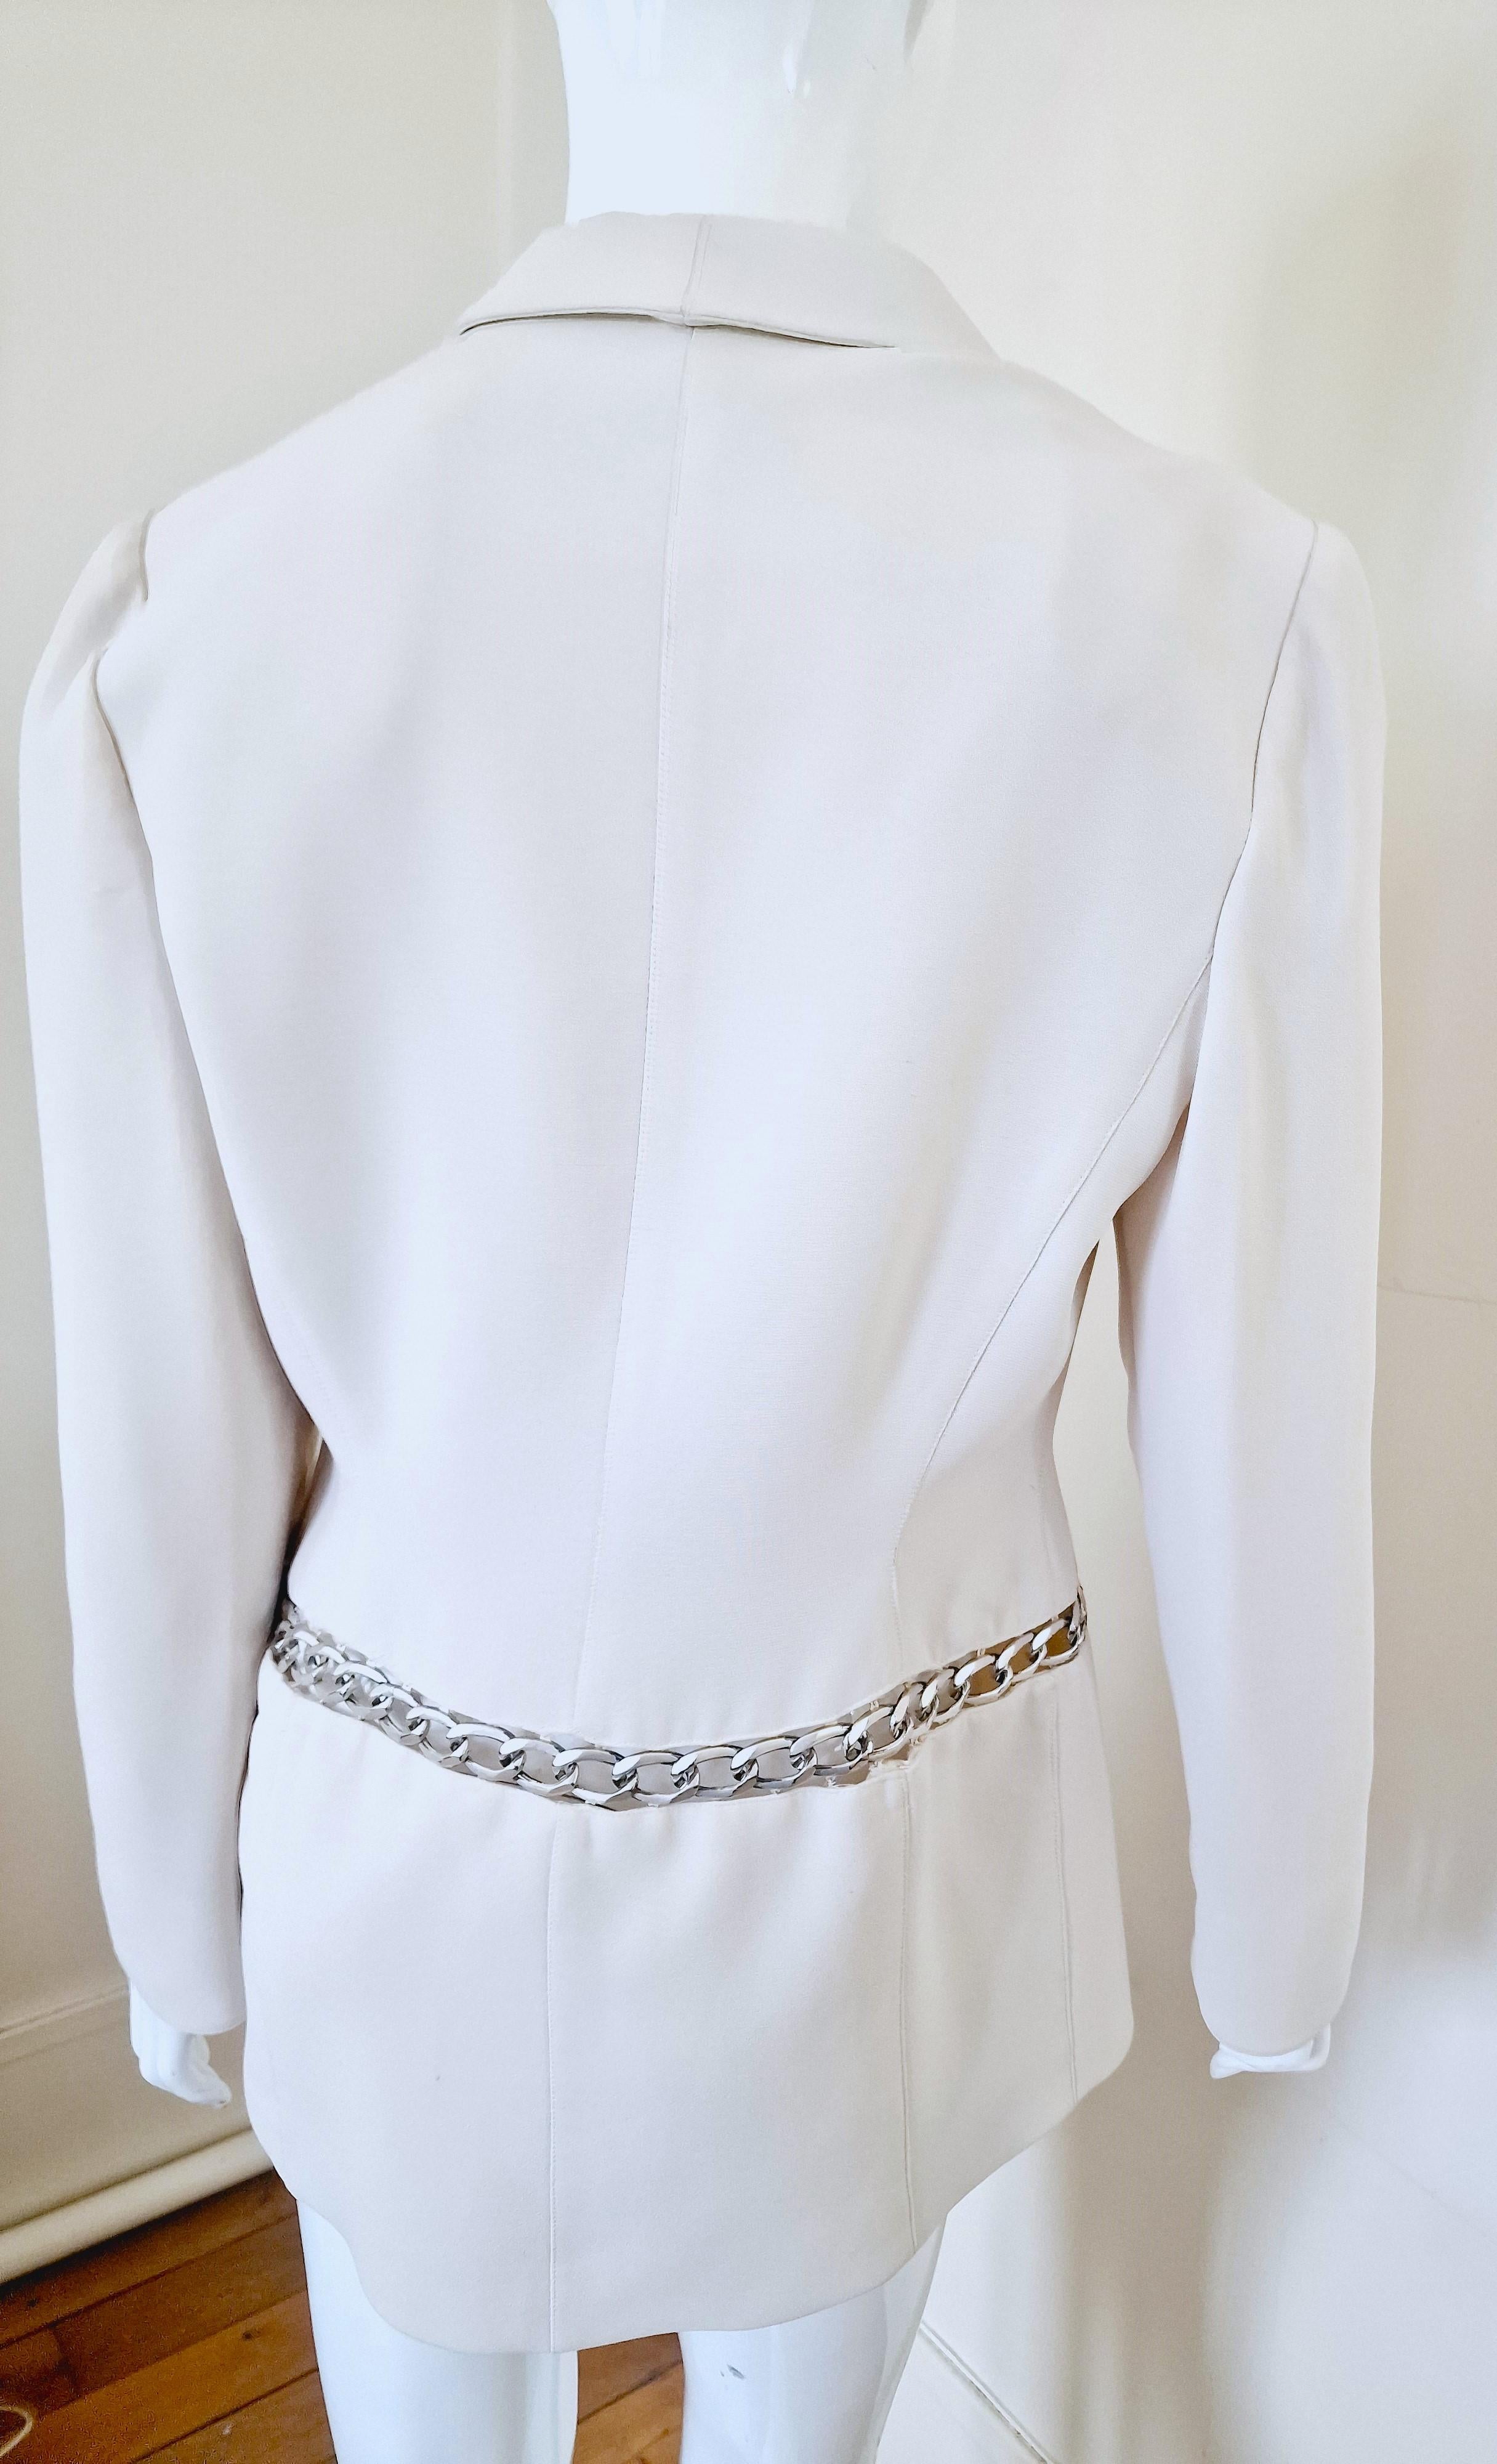 Thierry Mugler Chain Runway Evening Couture White Wasp Waist Large Blazer Jacket For Sale 5